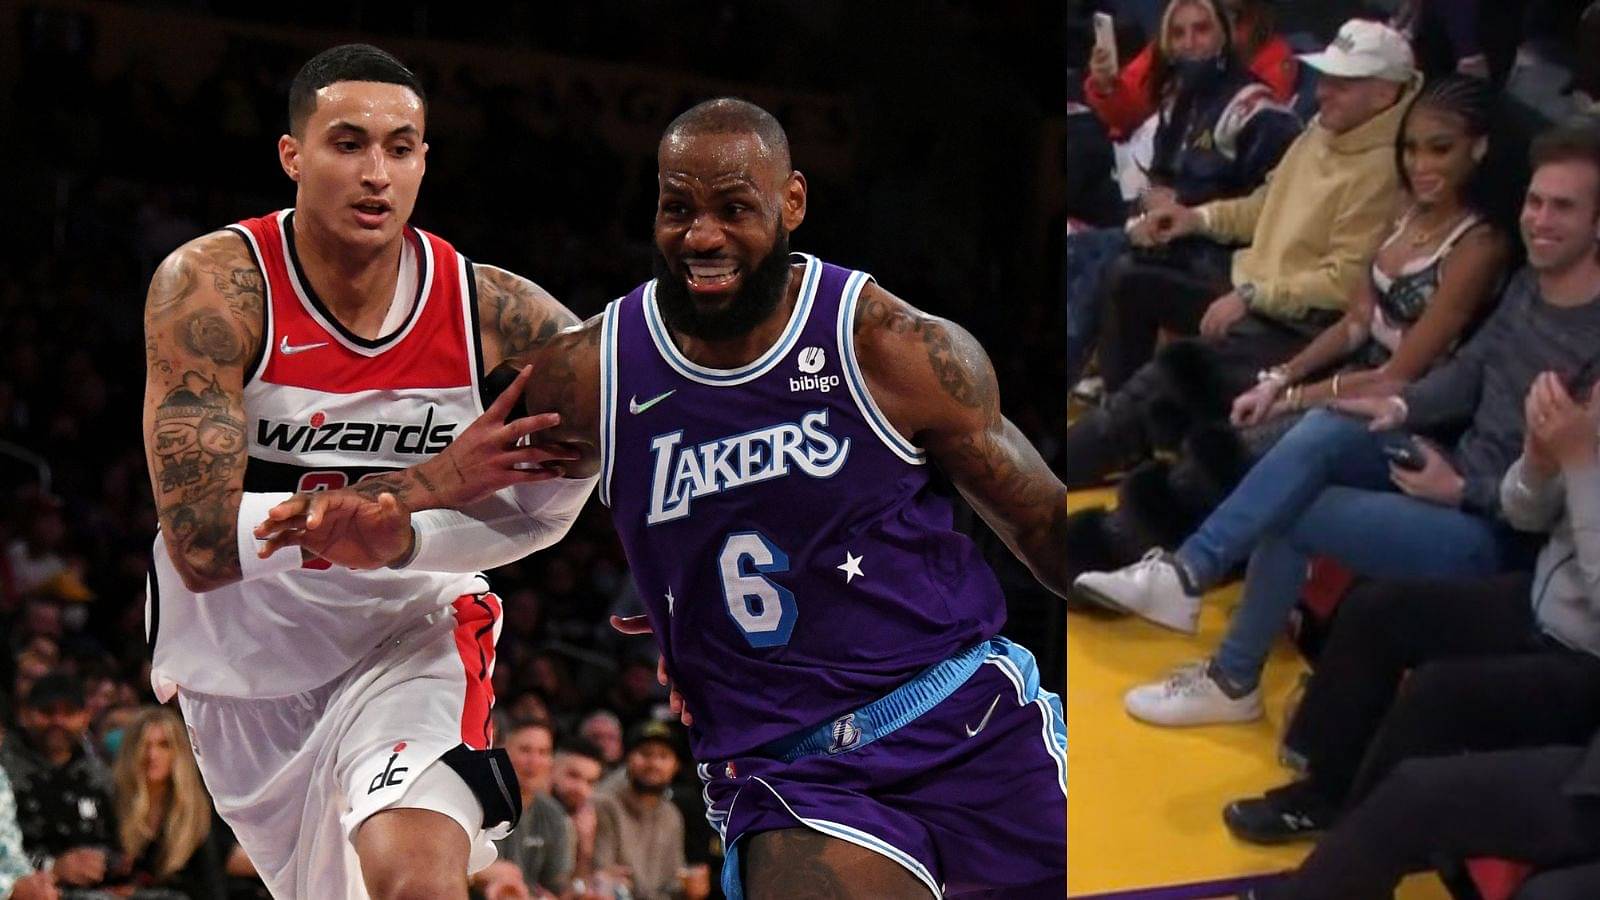 WATCH: LeBron James Bullies Kyle Kuzma in Front of his Girlfriend and Then Laughs With her